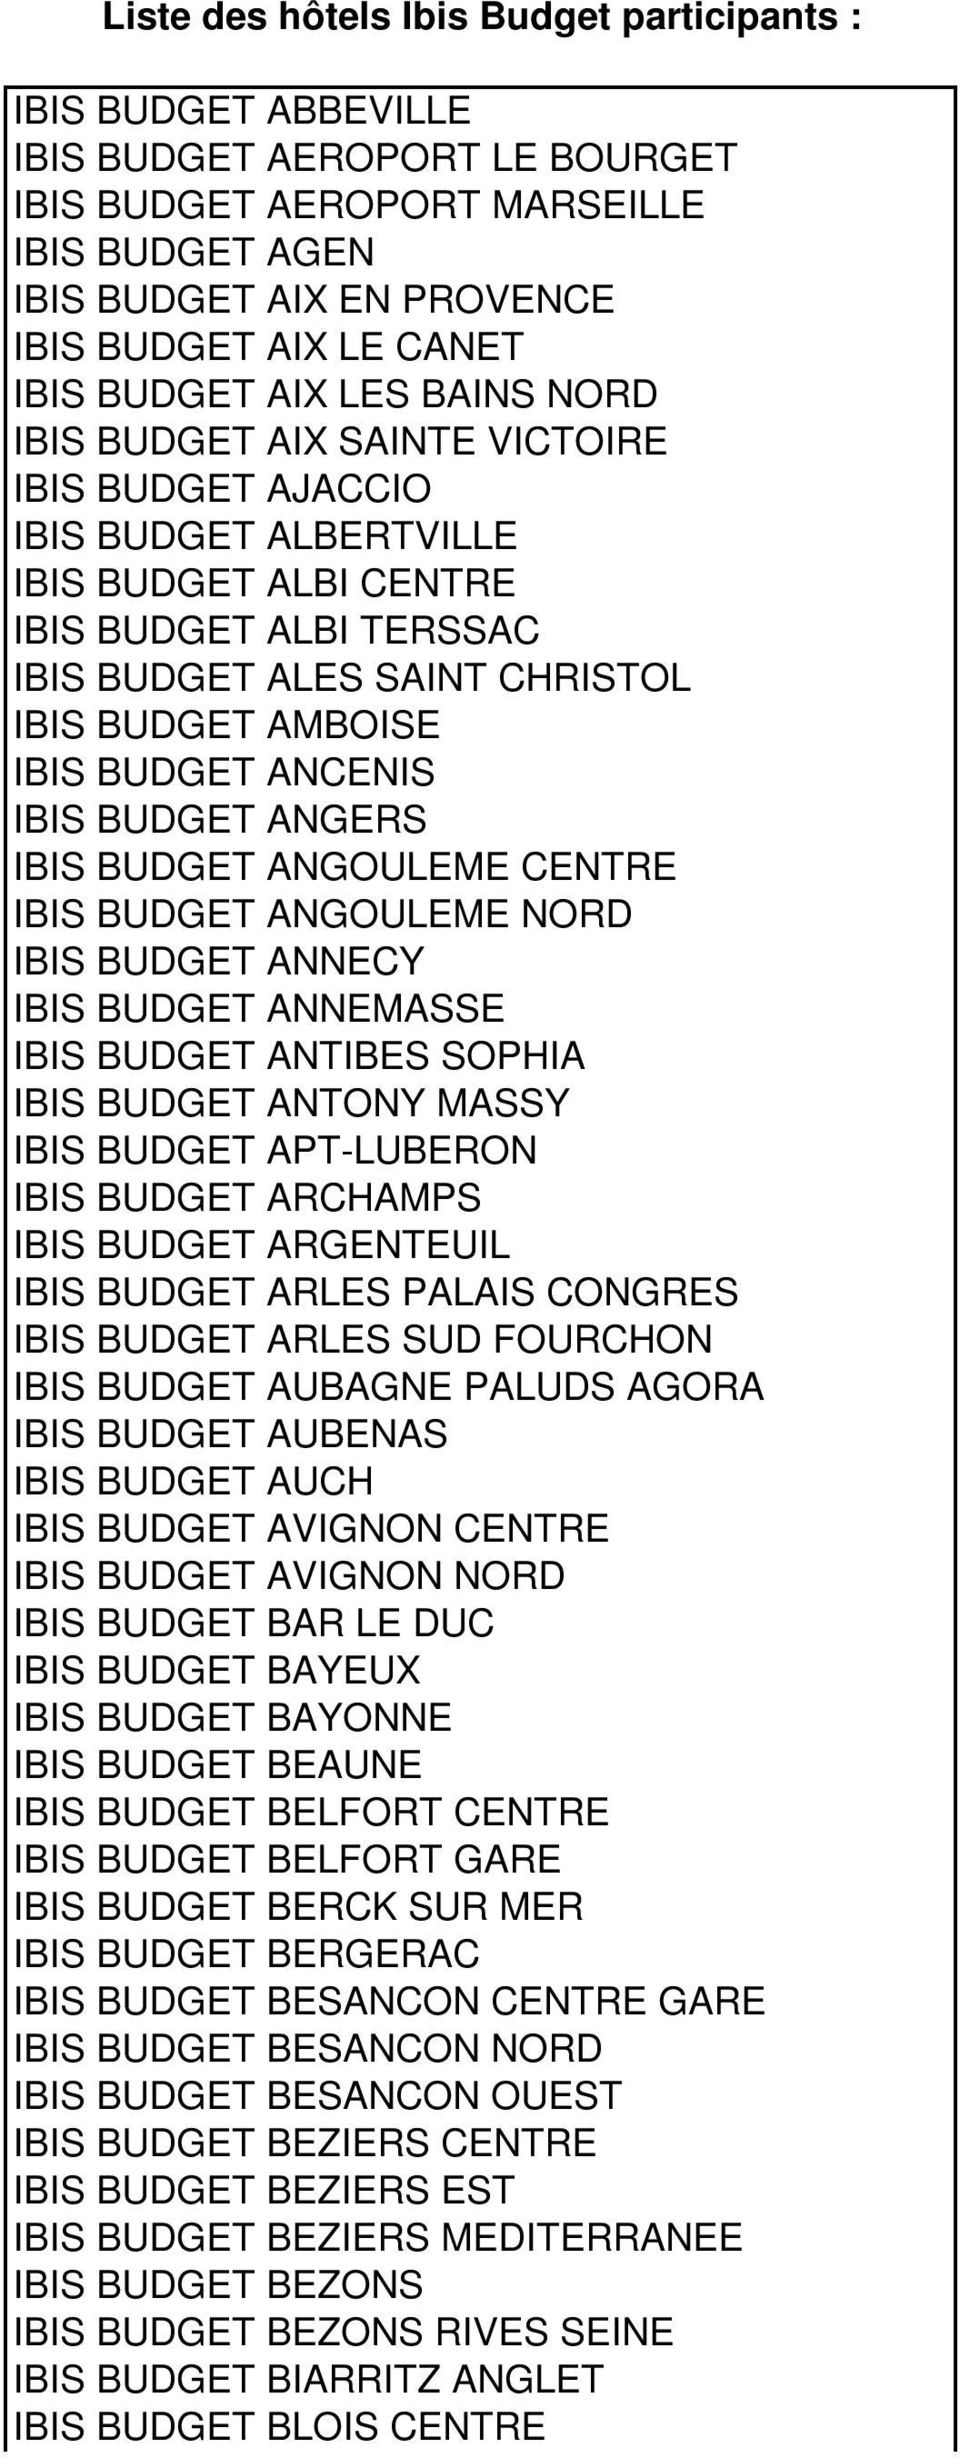 AMBOISE IBIS BUDGET ANCENIS IBIS BUDGET ANGERS IBIS BUDGET ANGOULEME CENTRE IBIS BUDGET ANGOULEME NORD IBIS BUDGET ANNECY IBIS BUDGET ANNEMASSE IBIS BUDGET ANTIBES SOPHIA IBIS BUDGET ANTONY MASSY